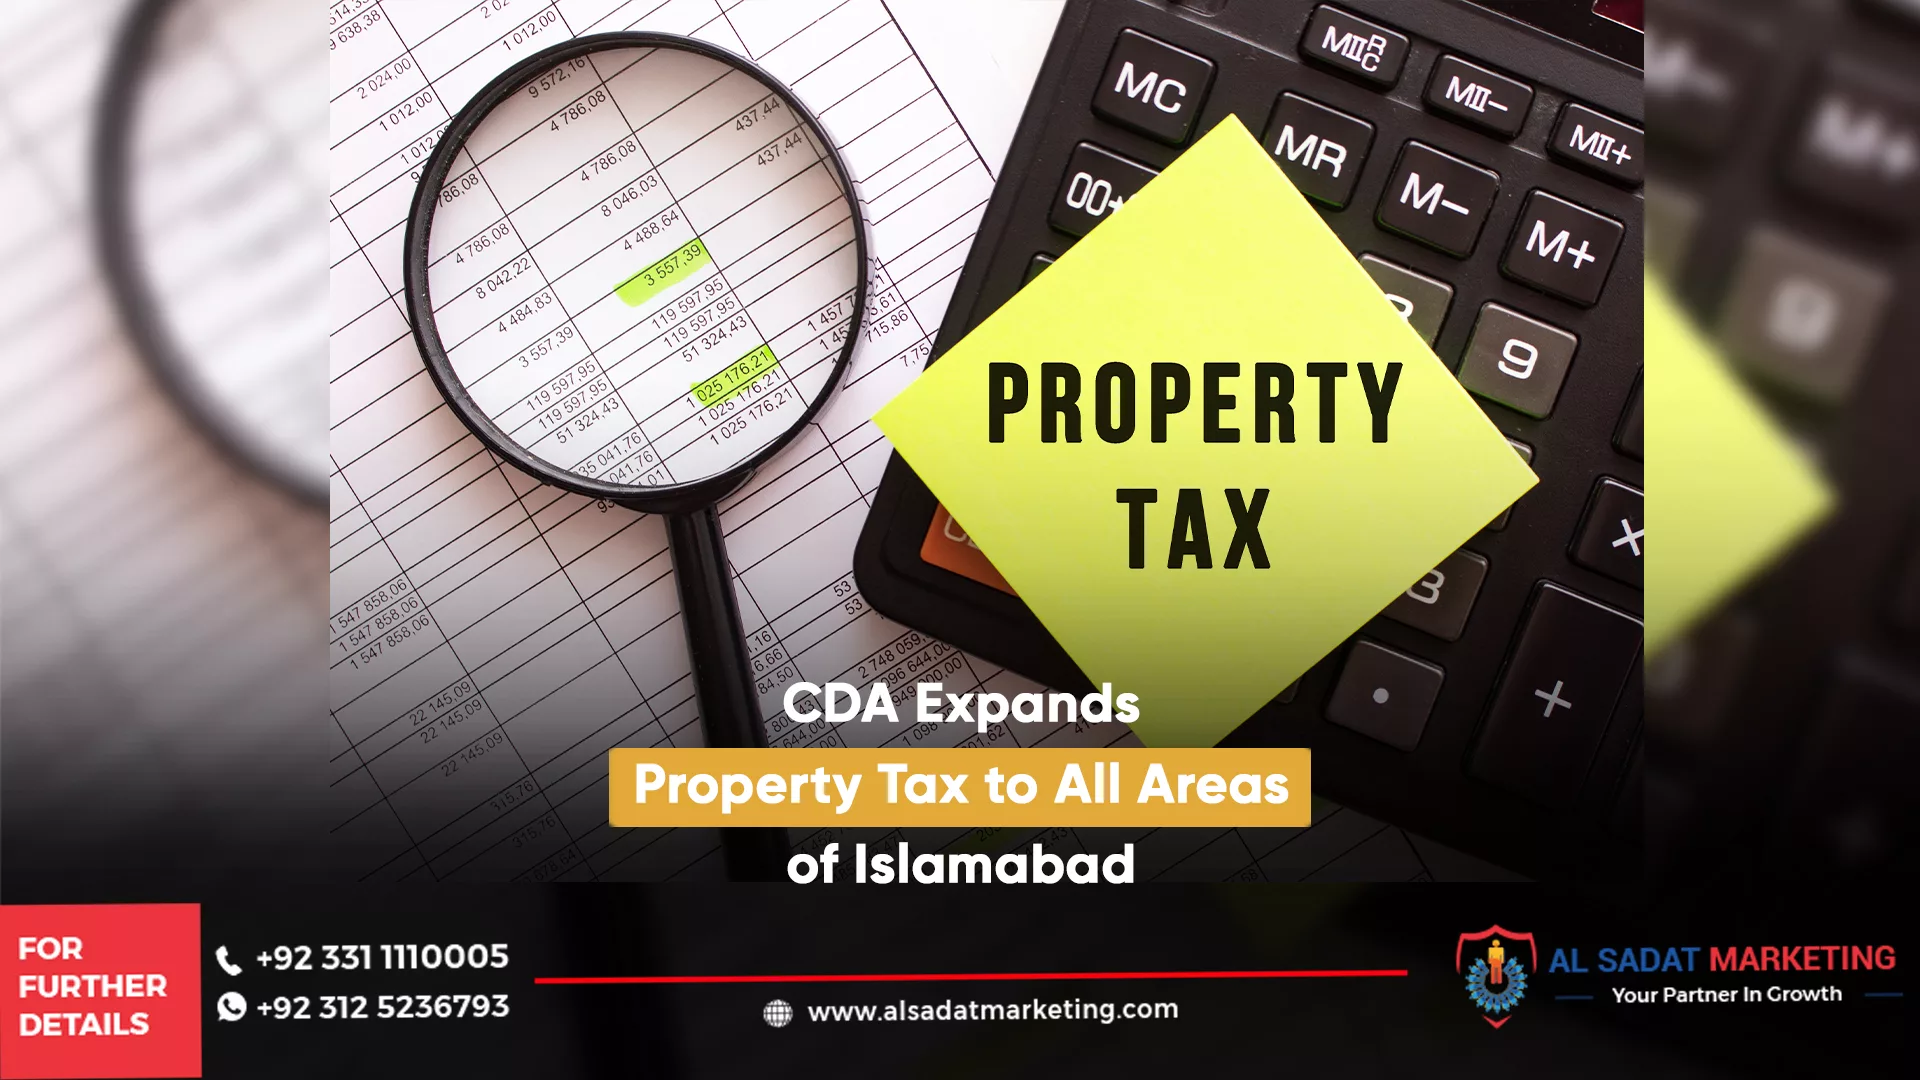 new property tax from cda in islamabad